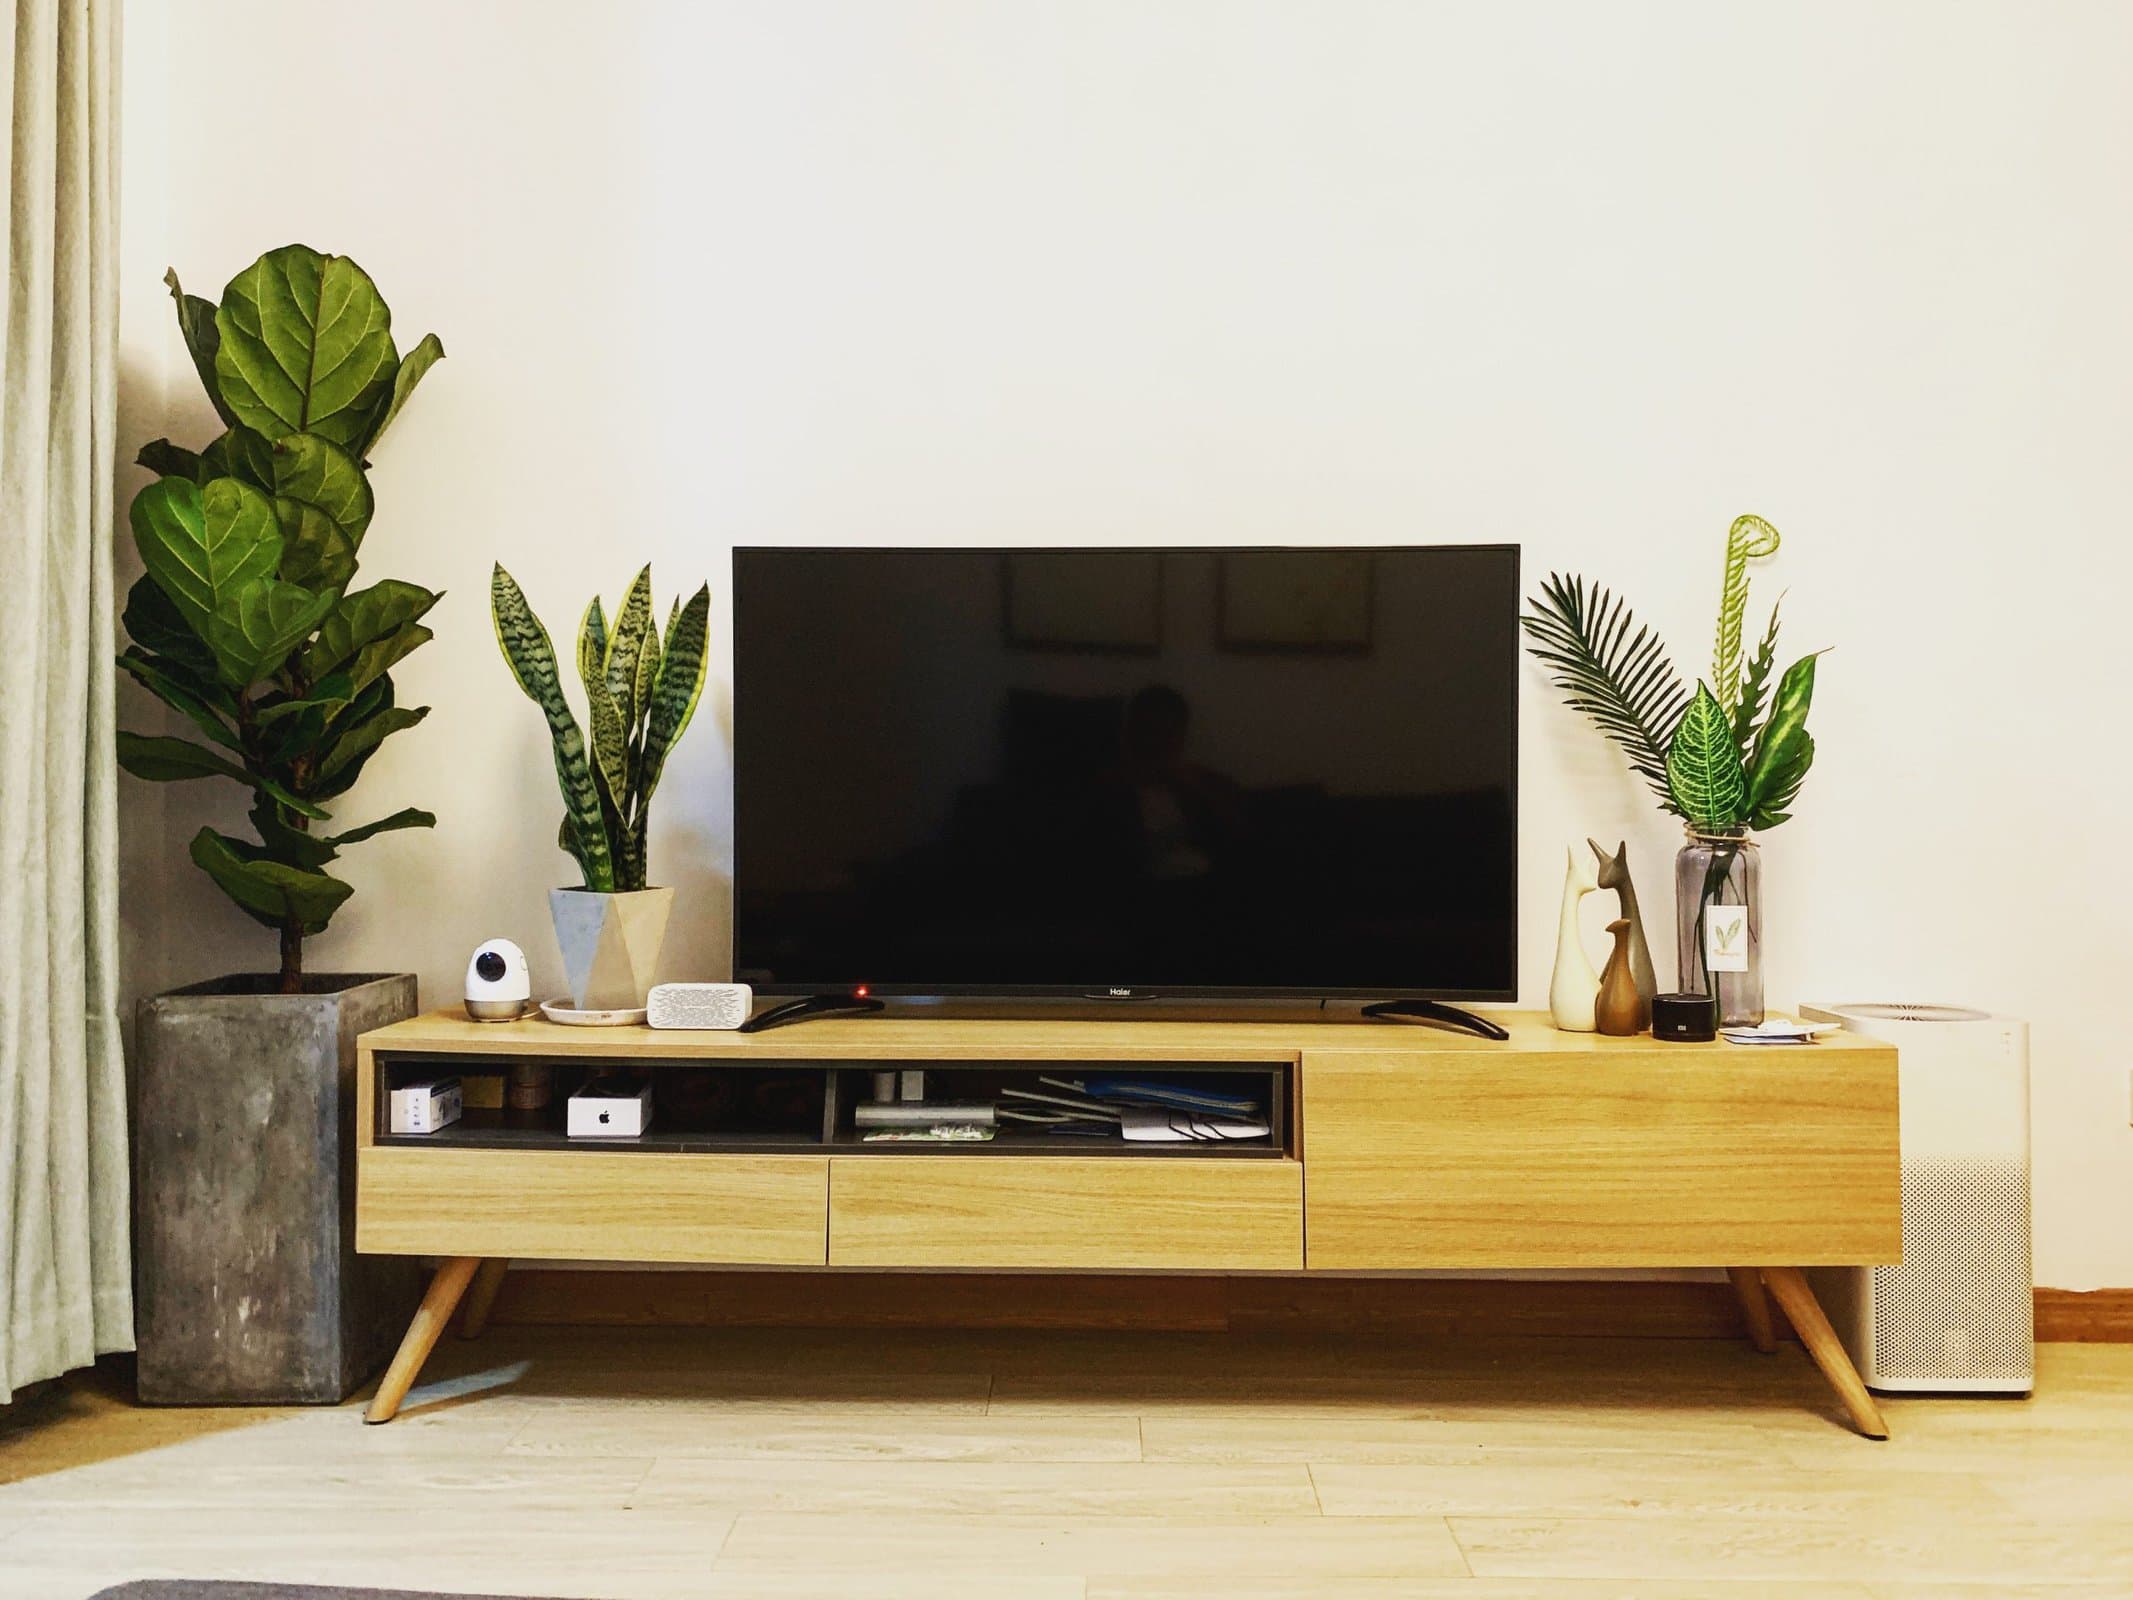  How Tall Should a TV stand Be scaled